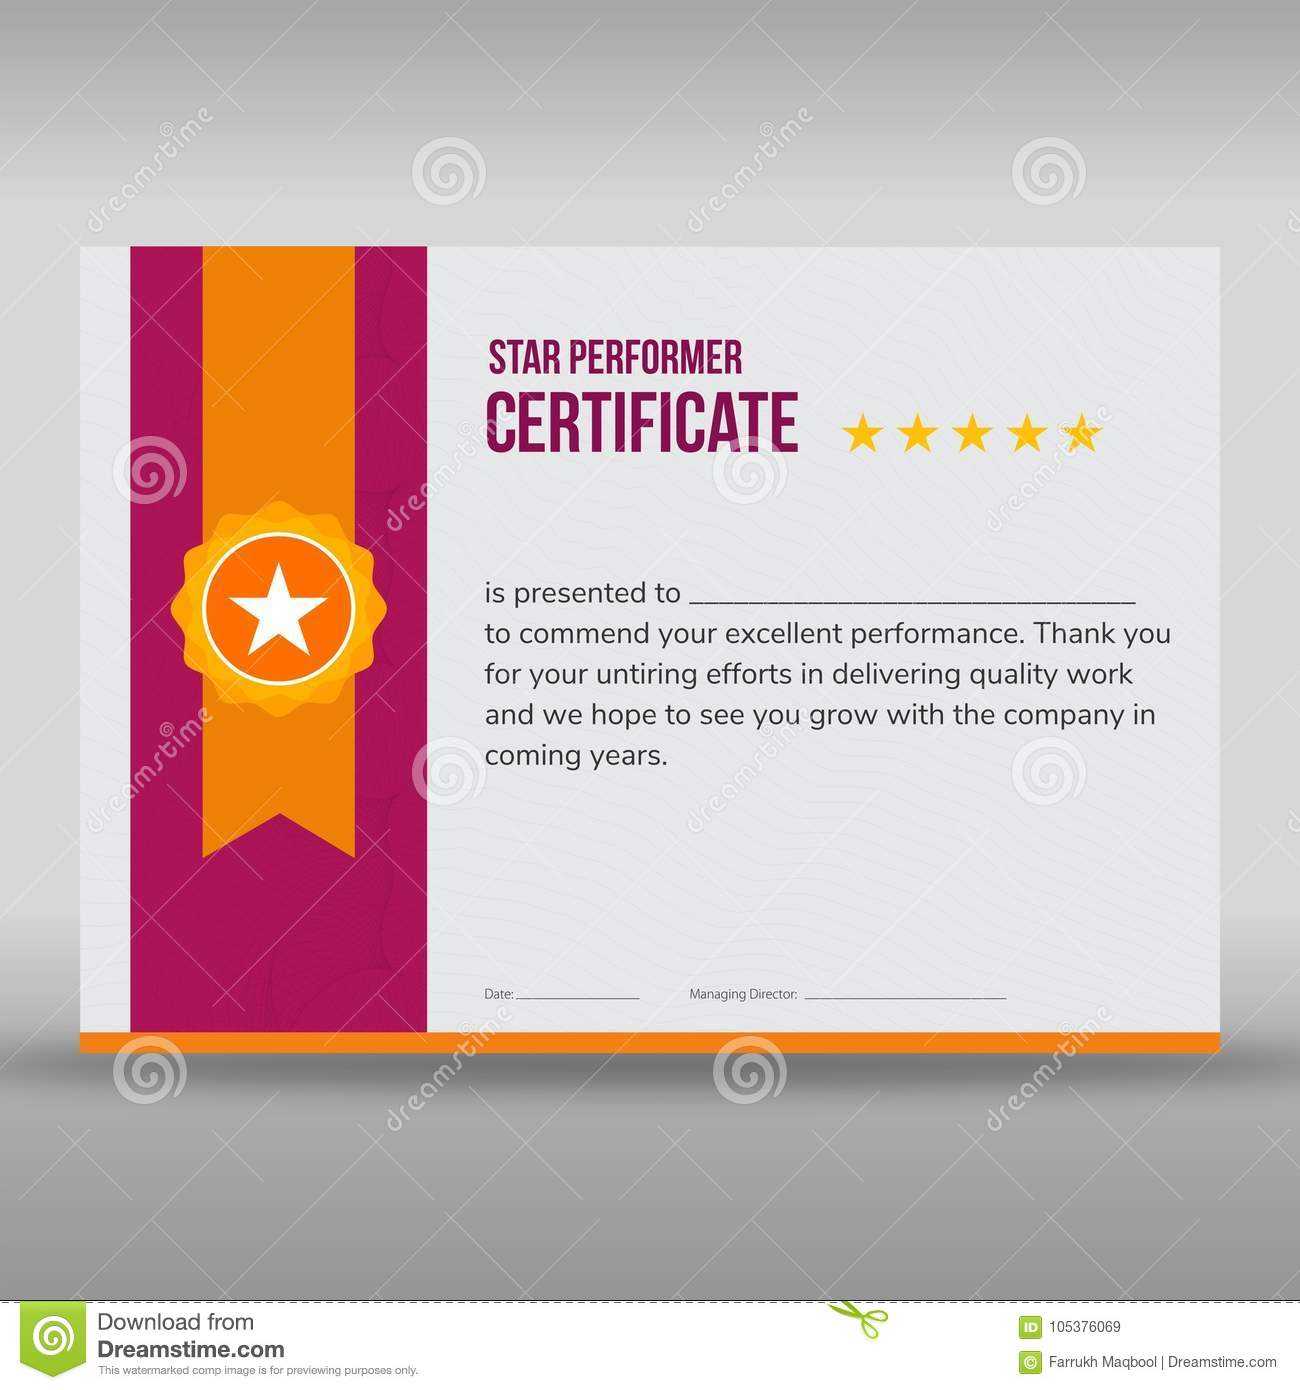 Professional Purple And Gold Certificate Stock Vector Intended For Star Performer Certificate Templates